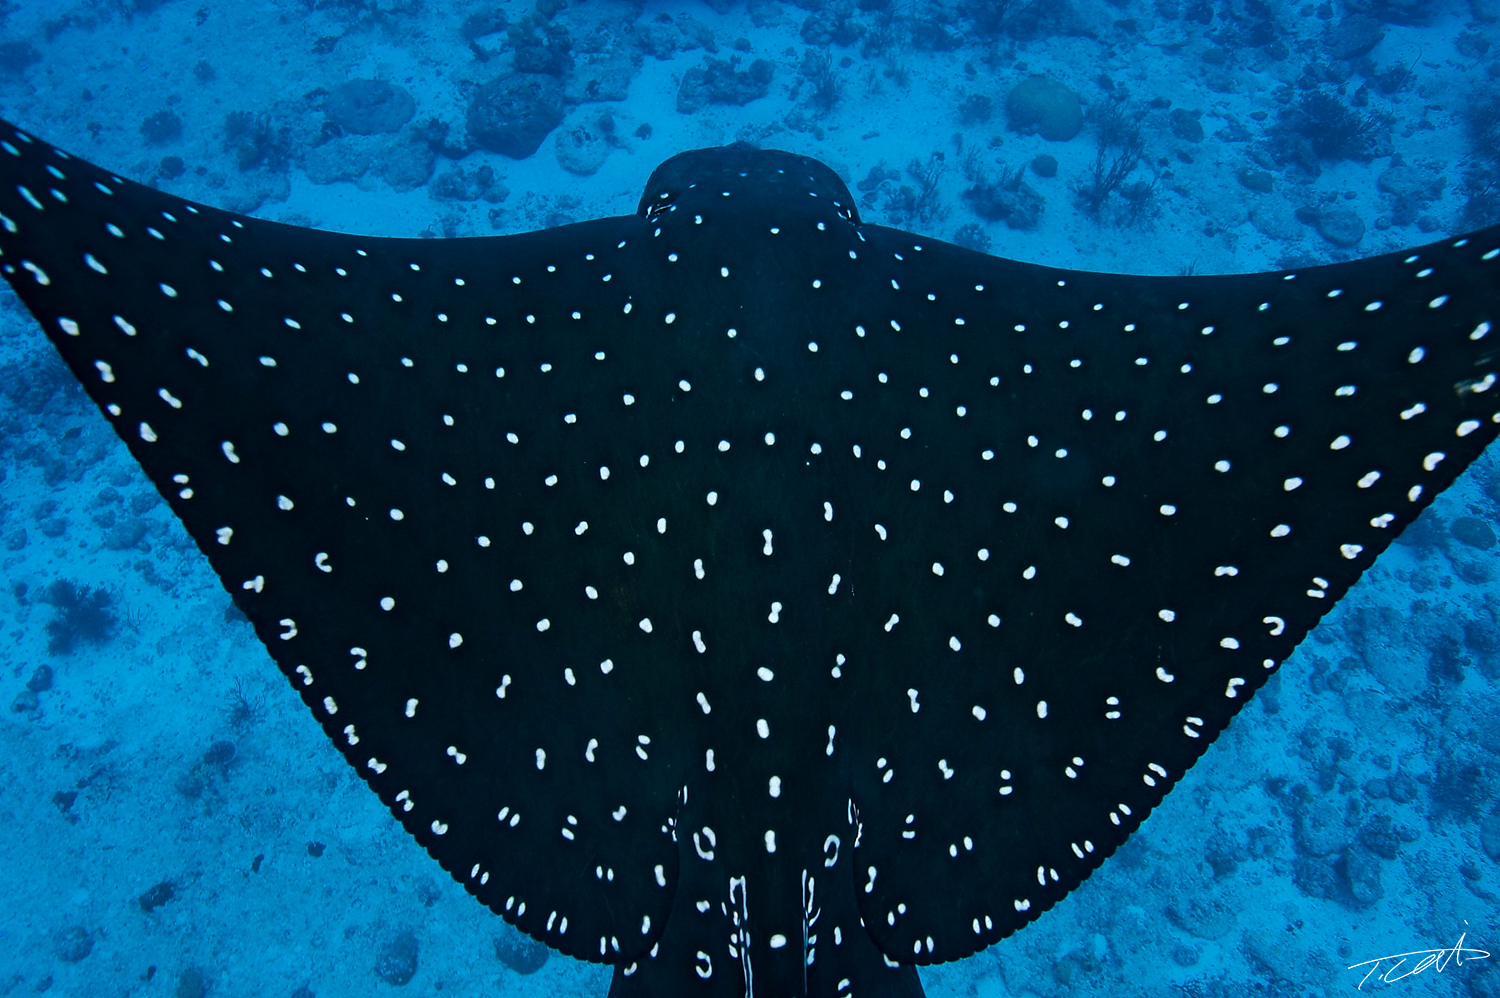 Spotted eagle ray.